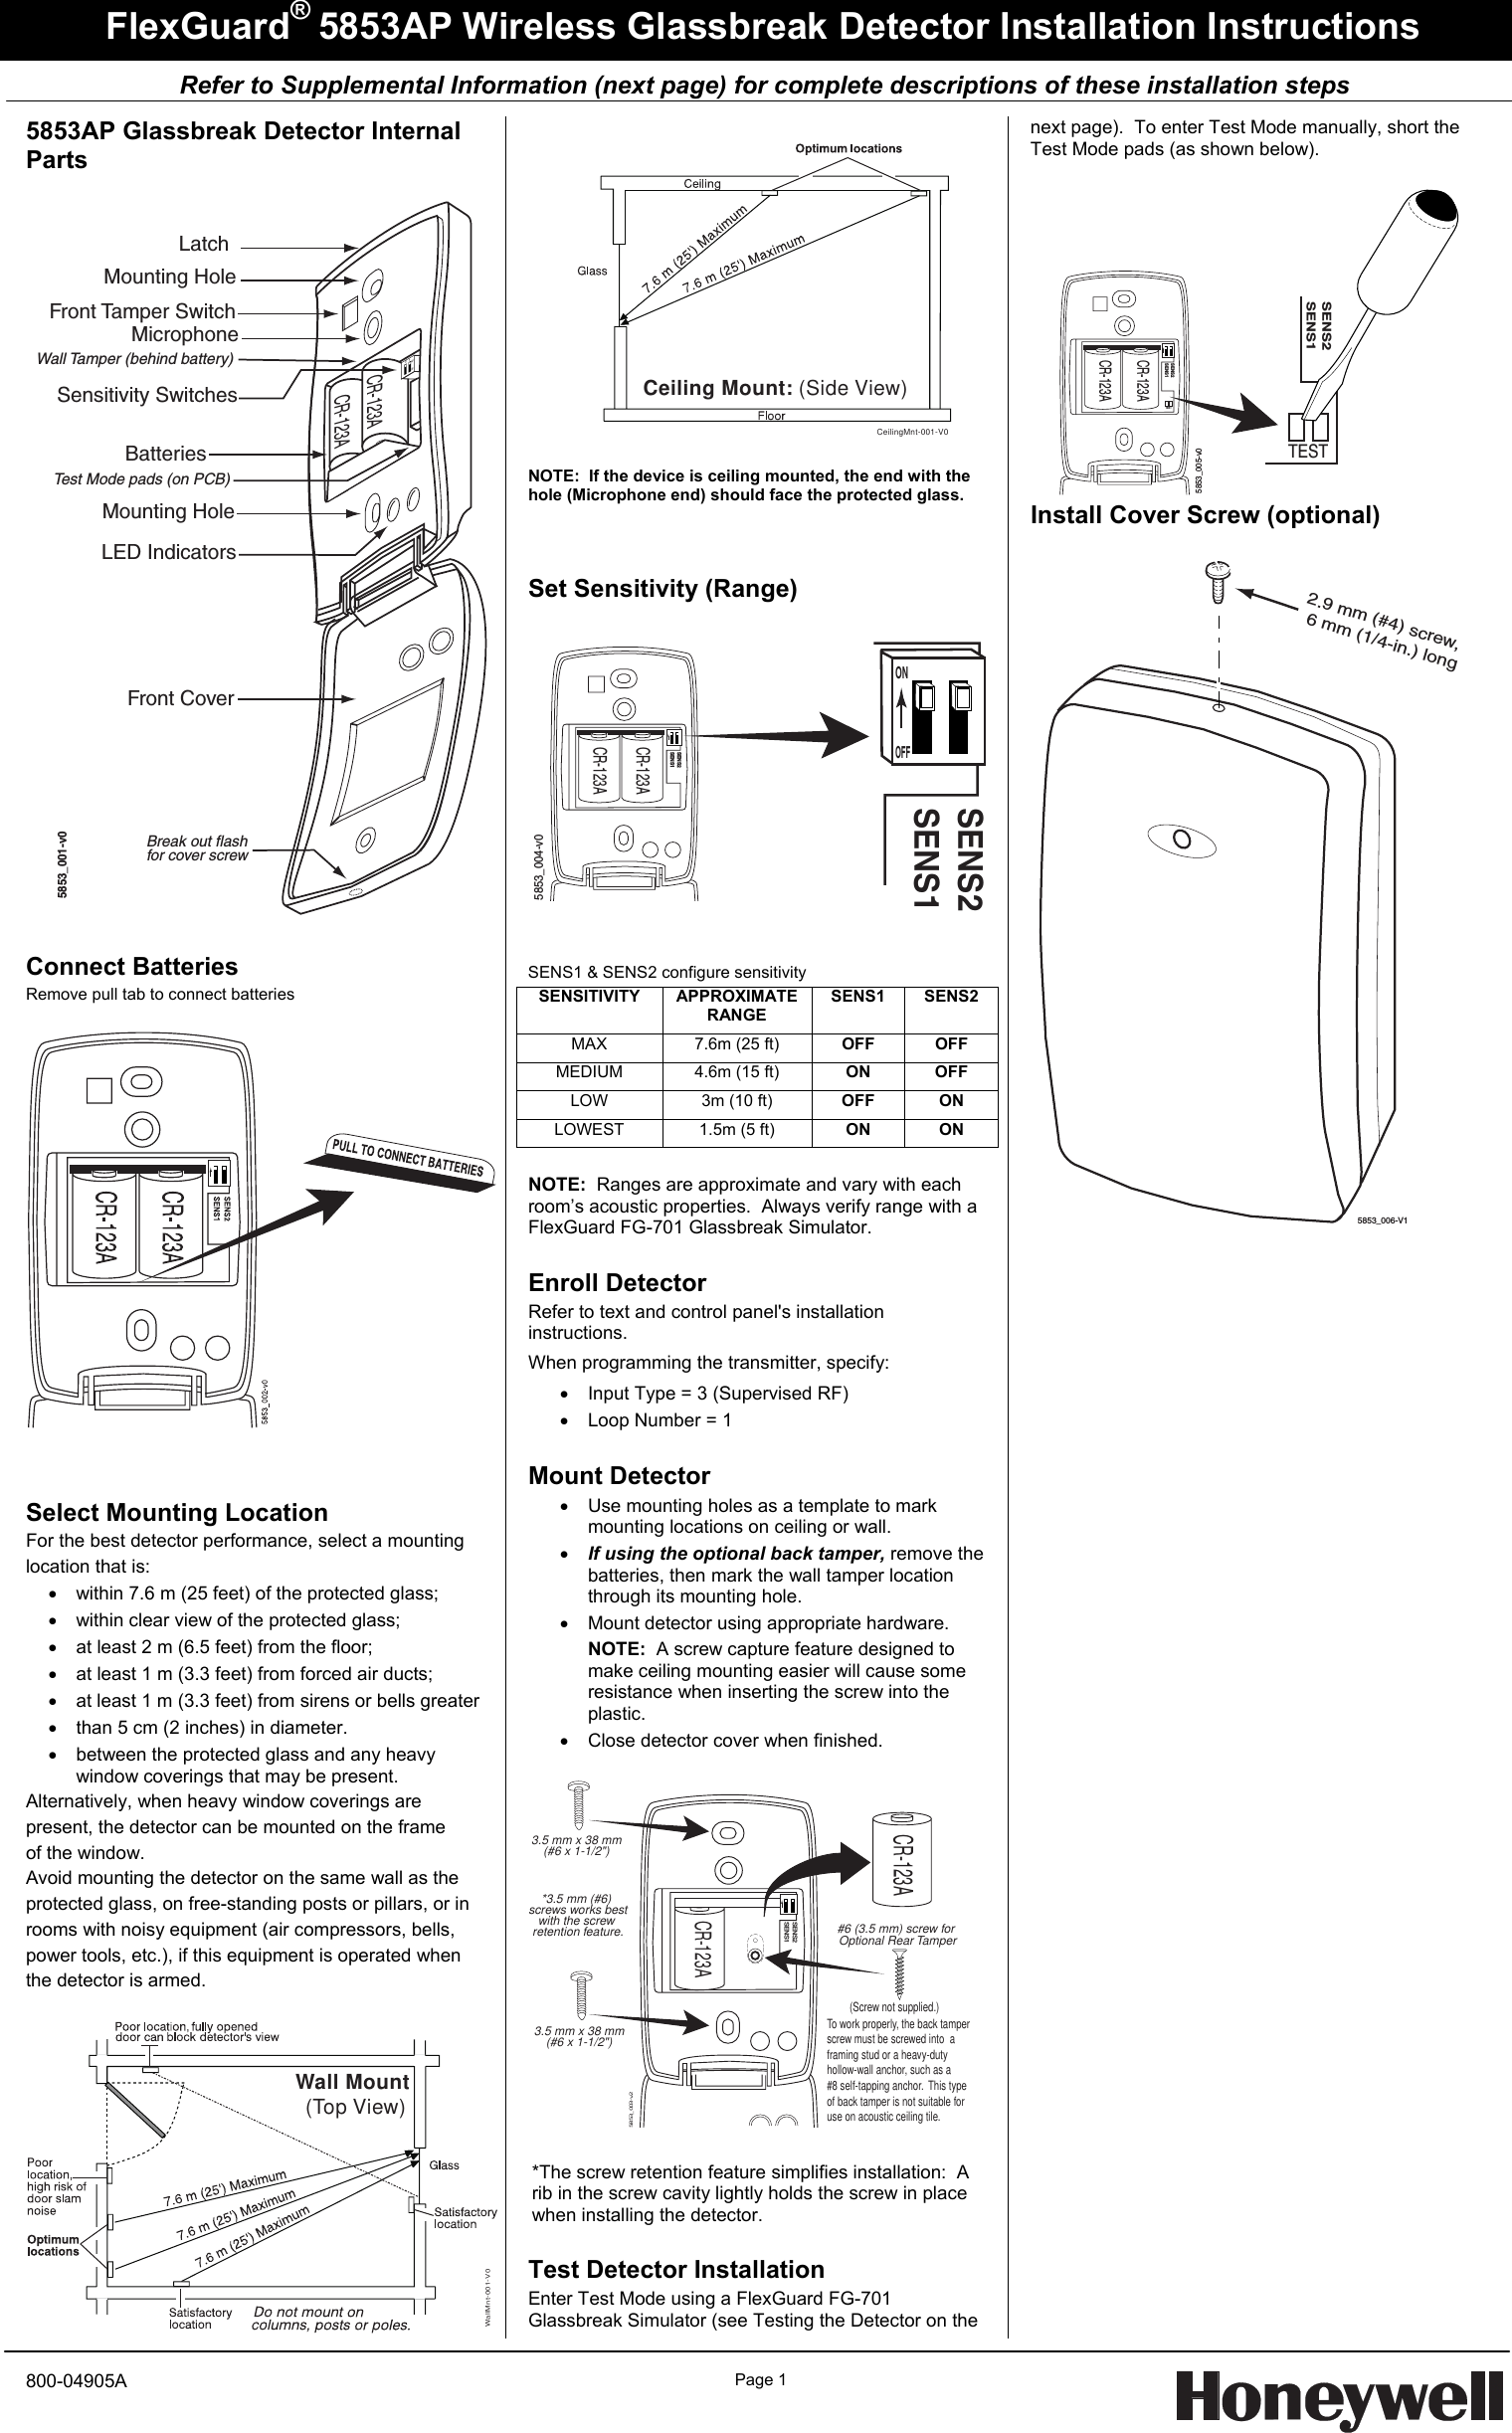     Refer to Supplemental Information (next page) for complete descriptions of these installation steps  FlexGuard® 5853AP Wireless Glassbreak Detector Installation Instructions 5853AP Glassbreak Detector Internal Parts  CR-123ACR-123AMounting HoleMounting HoleBatteriesFront Tamper SwitchLED IndicatorsMicrophoneSensitivity SwitchesWall Tamper (behind battery)Test Mode pads (on PCB)Front CoverLatchBreak out flashfor cover screw21ONOFF5853_001-v0  Connect Batteries Remove pull tab to connect batteries     Select Mounting Location For the best detector performance, select a mounting location that is: •  within 7.6 m (25 feet) of the protected glass; •  within clear view of the protected glass; •  at least 2 m (6.5 feet) from the floor; •  at least 1 m (3.3 feet) from forced air ducts; •  at least 1 m (3.3 feet) from sirens or bells greater •  than 5 cm (2 inches) in diameter. •  between the protected glass and any heavy window coverings that may be present. Alternatively, when heavy window coverings are present, the detector can be mounted on the frame of the window. Avoid mounting the detector on the same wall as the protected glass, on free-standing posts or pillars, or in rooms with noisy equipment (air compressors, bells, power tools, etc.), if this equipment is operated when the detector is armed.  Wall Mount (Top View)WallMnt-001-V0  CeilingMnt-001-V0Ceiling Mount: (Side View)  NOTE:  If the device is ceiling mounted, the end with the hole (Microphone end) should face the protected glass.   Set Sensitivity (Range)  SENS2SENS1CR-123ACR-123ASENS2SENS15853_004-v0ONOFF   SENS1 &amp; SENS2 configure sensitivity SENSITIVITY  APPROXIMATERANGE  SENS1 SENS2 MAX  7.6m (25 ft)  OFF OFF MEDIUM  4.6m (15 ft)  ON OFF LOW  3m (10 ft)  OFF ON LOWEST  1.5m (5 ft)  ON ON  NOTE:  Ranges are approximate and vary with each room’s acoustic properties.  Always verify range with a  FlexGuard FG-701 Glassbreak Simulator.  Enroll Detector Refer to text and control panel&apos;s installation instructions.   When programming the transmitter, specify: •  Input Type = 3 (Supervised RF) •  Loop Number = 1  Mount Detector  •  Use mounting holes as a template to mark mounting locations on ceiling or wall. • If using the optional back tamper, remove the batteries, then mark the wall tamper location through its mounting hole. •  Mount detector using appropriate hardware. NOTE:  A screw capture feature designed to make ceiling mounting easier will cause some resistance when inserting the screw into the plastic. •  Close detector cover when finished.  CR-123ACR-123ASENS2SENS15853_003-v2(Screw not supplied.)3.5 mm x 38 mm(#6 x 1-1/2&quot;)3.5 mm x 38 mm(#6 x 1-1/2&quot;)#6 (3.5 mm) screw for Optional Rear Tamper*3.5 mm (#6) screws works bestwith the screw retention feature.To work properly, the back tamperscrew must be screwed into  a framing stud or a heavy-dutyhollow-wall anchor, such as a #8 self-tapping anchor.  This type of back tamper is not suitable for use on acoustic ceiling tile.   *The screw retention feature simplifies installation:  A rib in the screw cavity lightly holds the screw in place when installing the detector.   Test Detector Installation Enter Test Mode using a FlexGuard FG-701 Glassbreak Simulator (see Testing the Detector on the next page).  To enter Test Mode manually, short the Test Mode pads (as shown below).  CR-123ACR-123ASENS2SENS1SENS2SENS15853_005-v0TESTTEST Install Cover Screw (optional)  5853_006-V12.9 mm (#4) screw, 6 mm (1/4-in.) long       800-04905A Page 1   